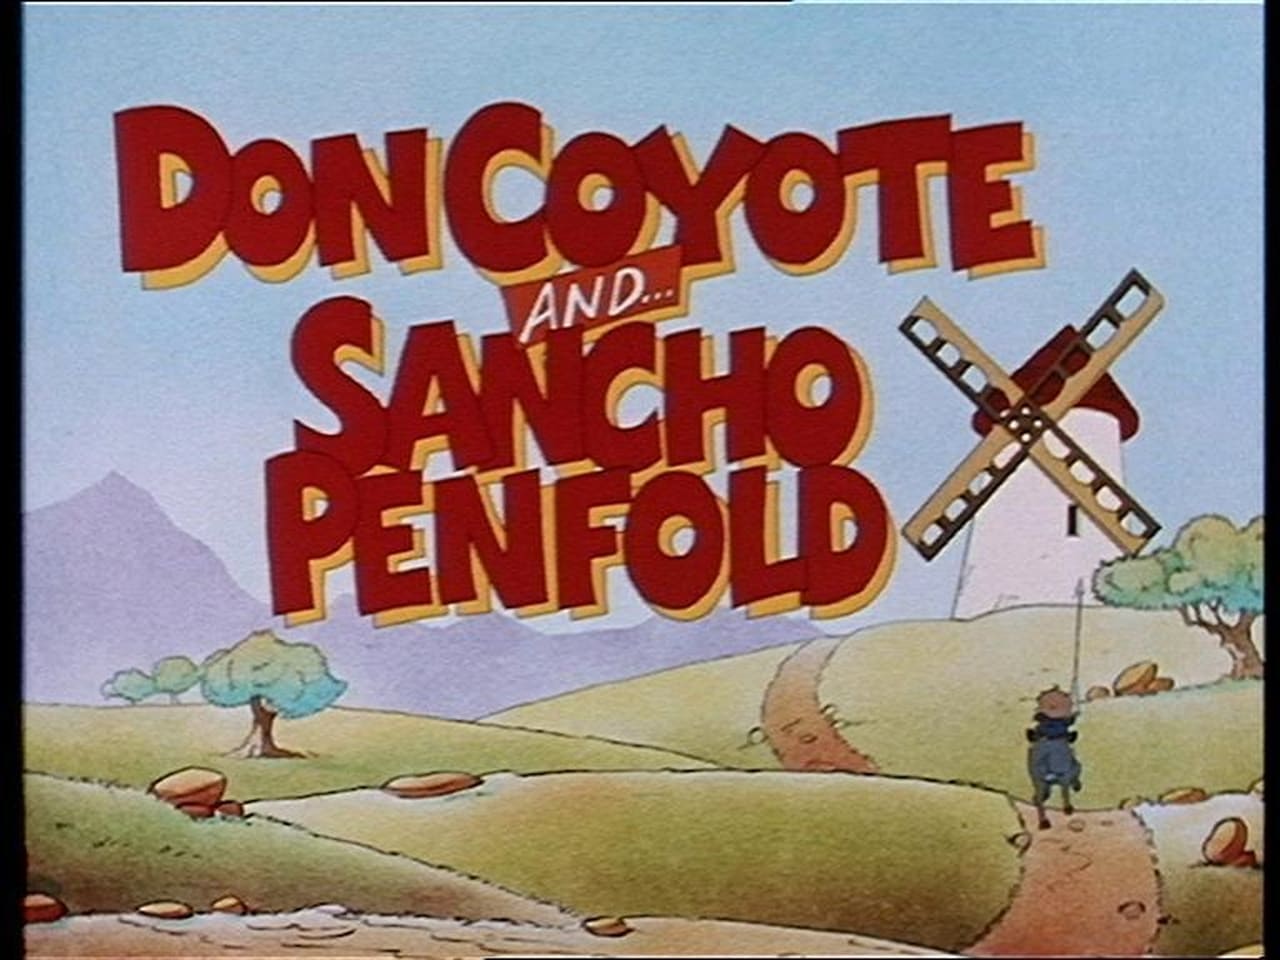 Don Coyote and Sancho Penfold